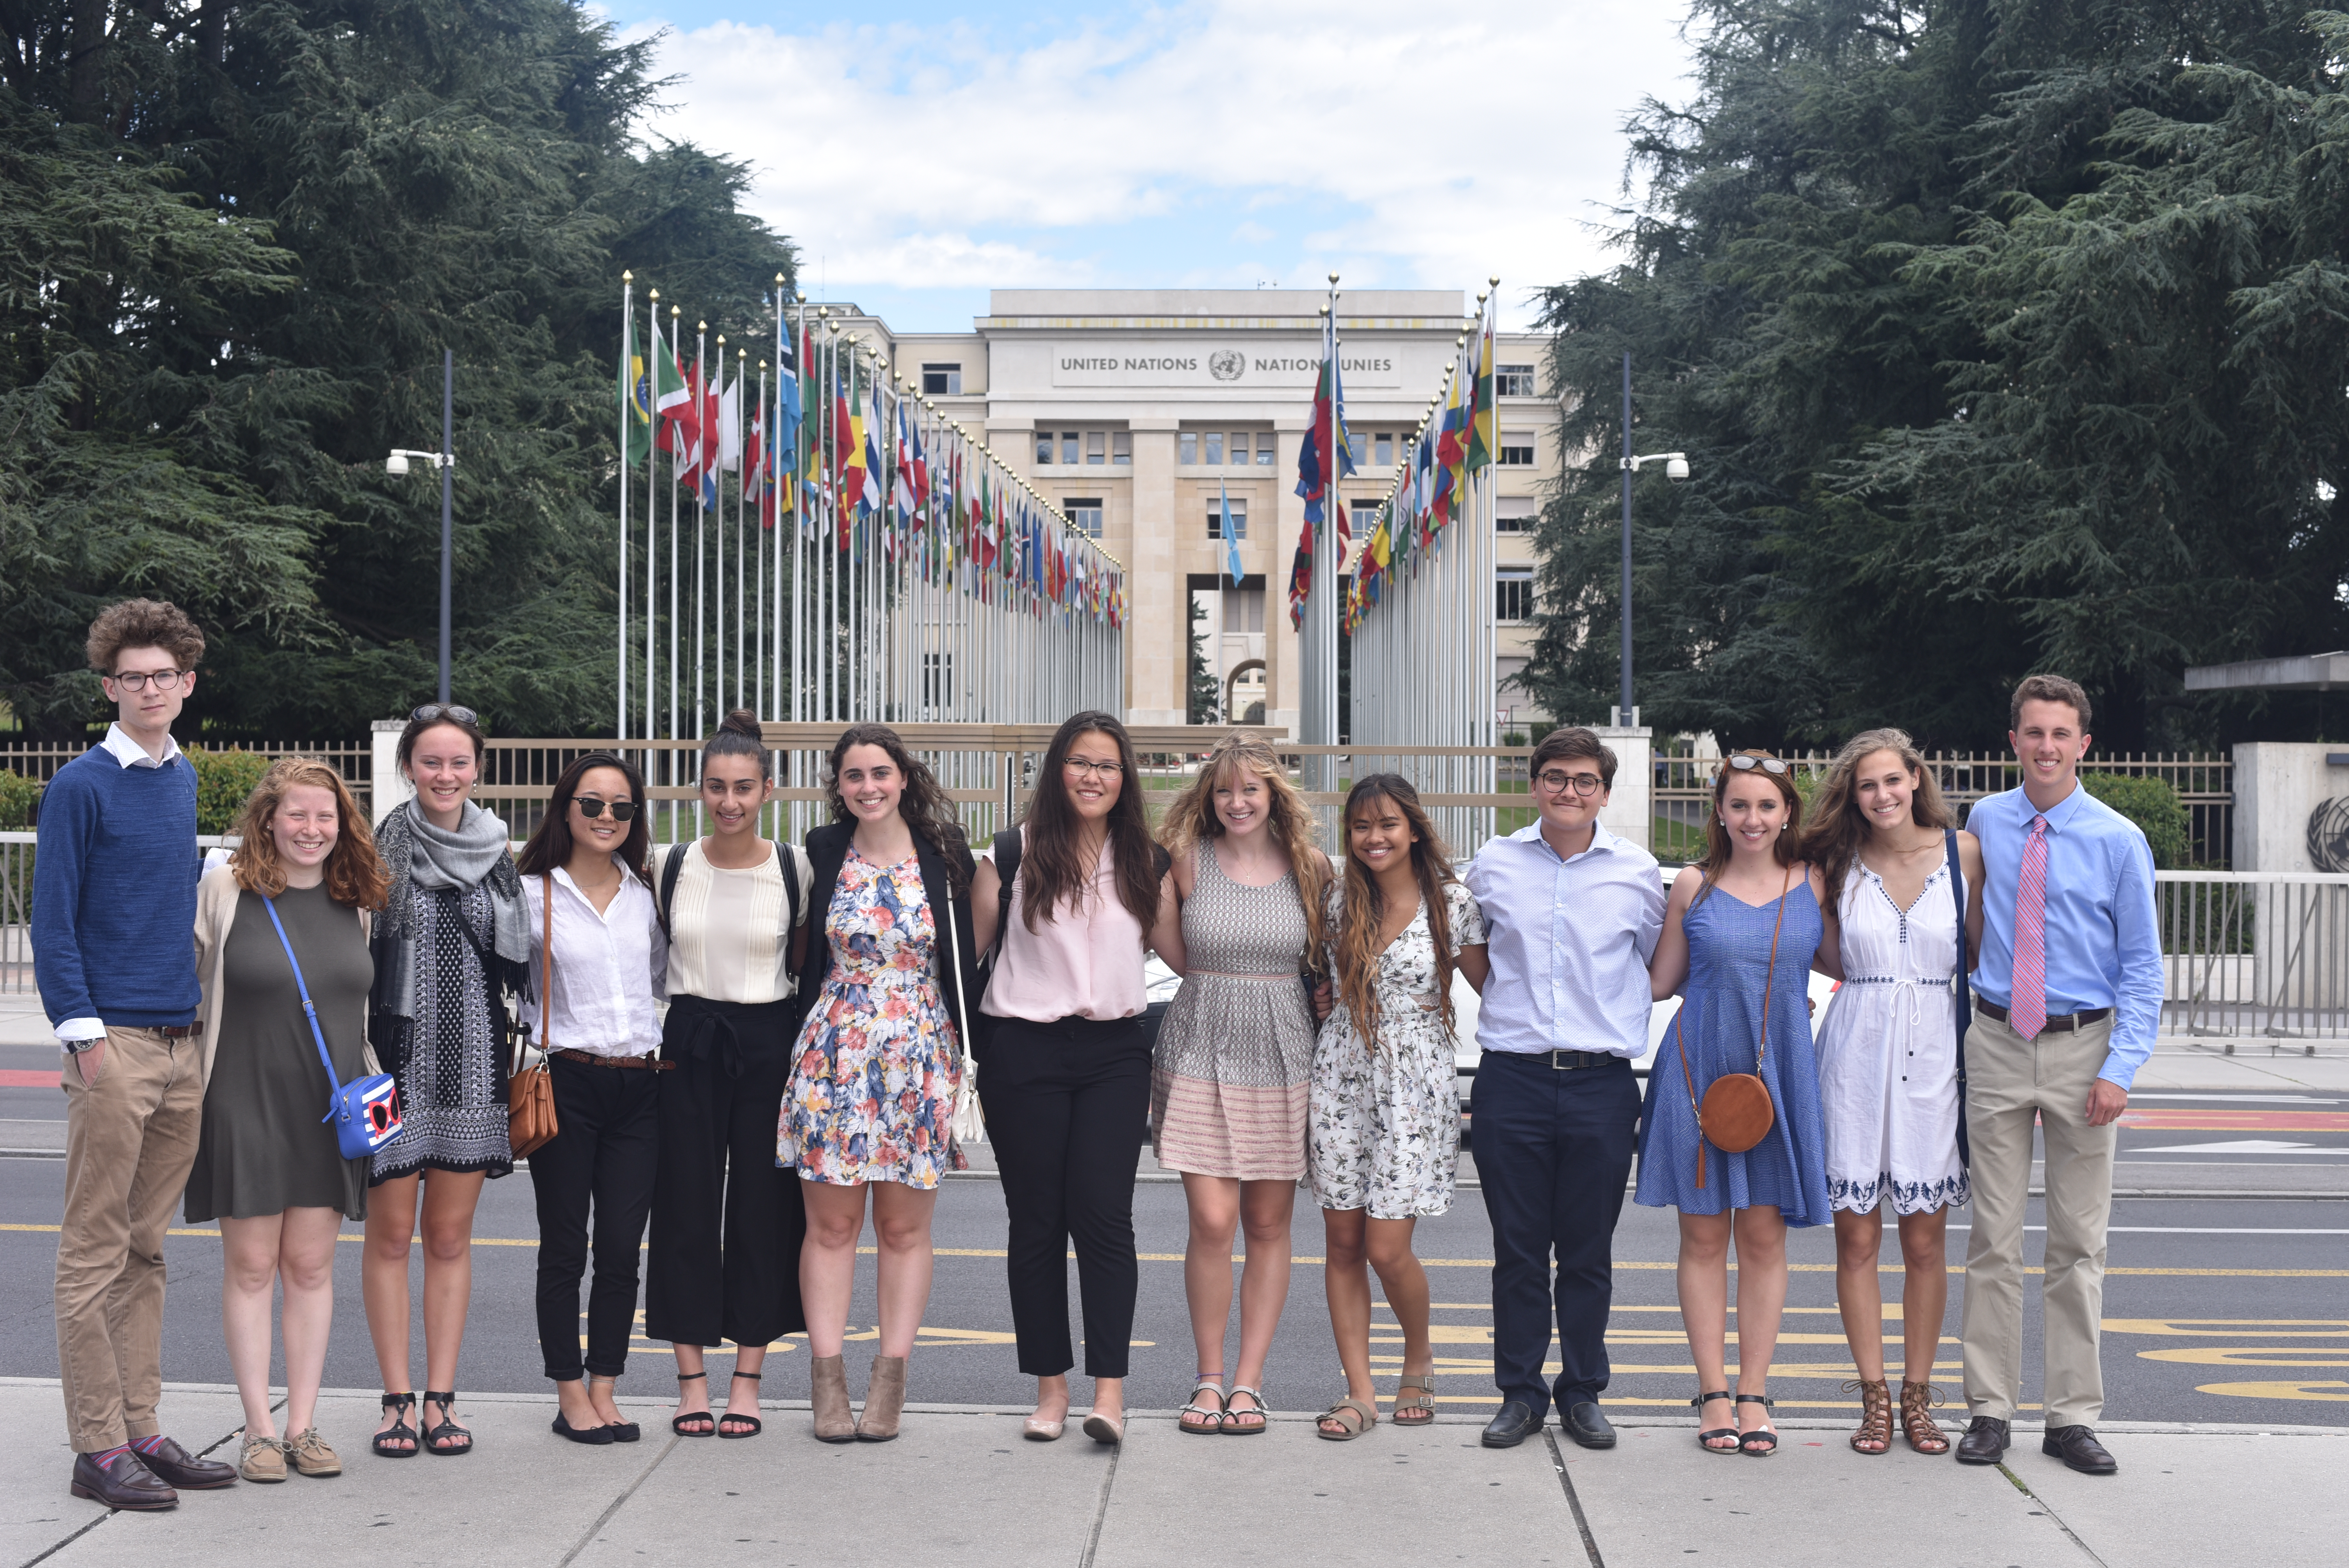 A row of students standing outside in front of the United Nations building